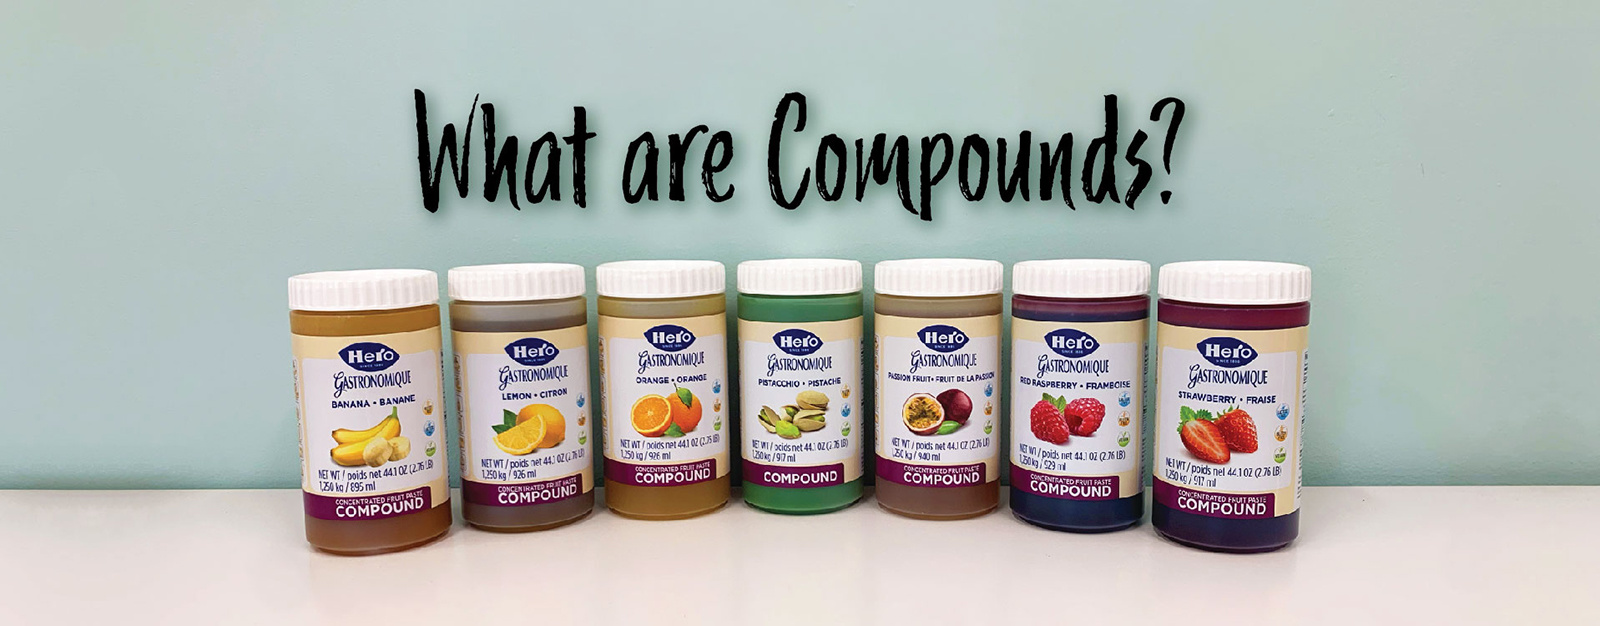 What are Compounds?